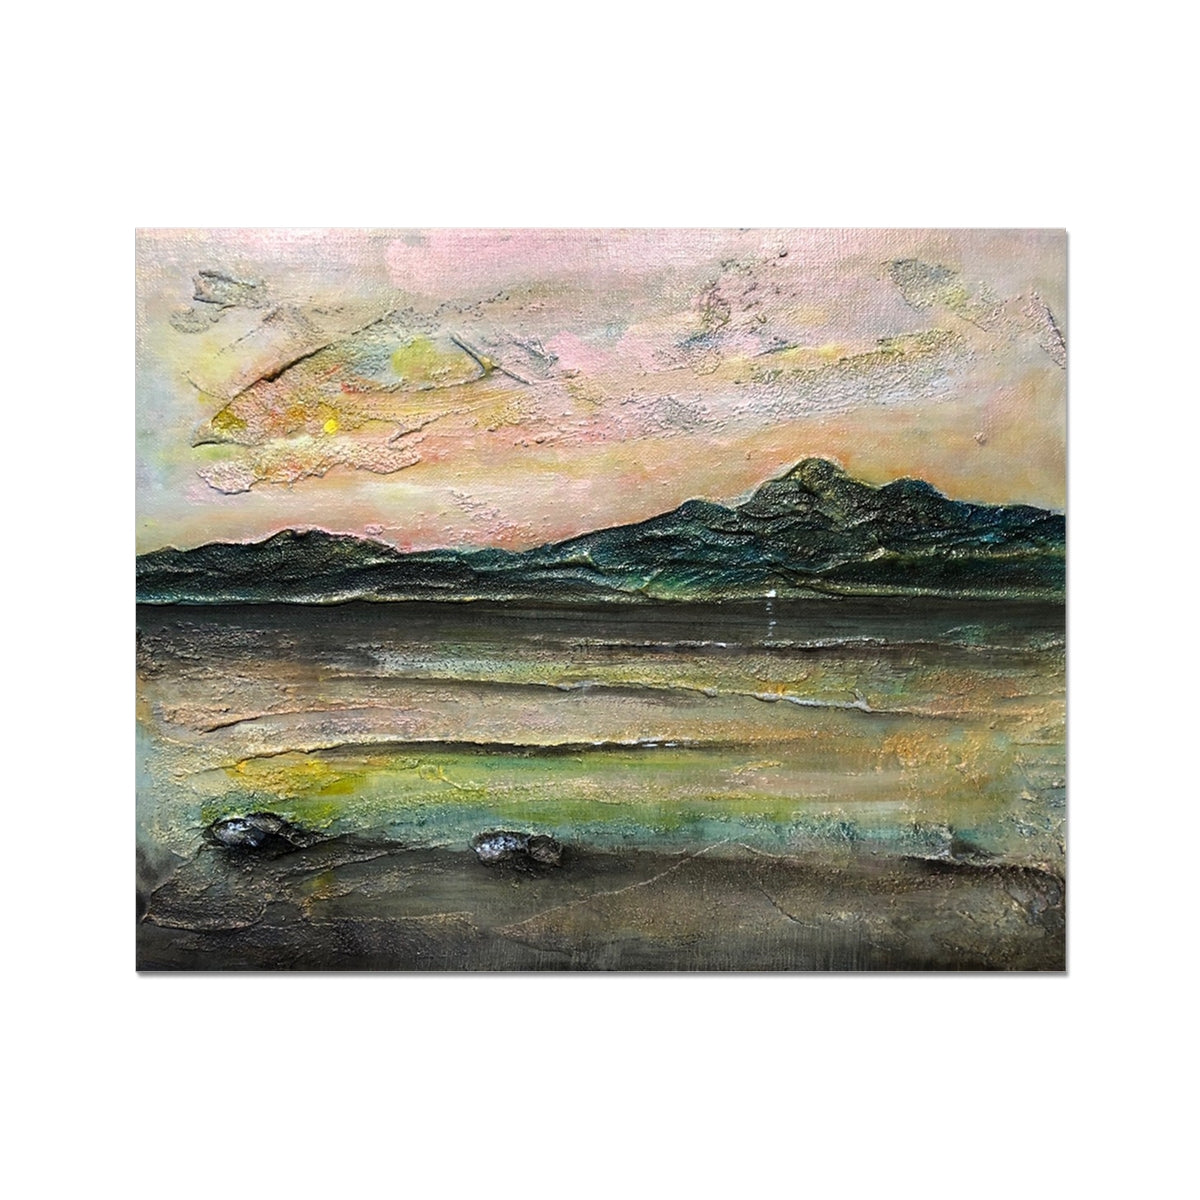 An Ethereal Loch Na Dal Skye Painting | Artist Proof Collector Prints From Scotland-Artist Proof Collector Prints-Scottish Lochs & Mountains Art Gallery-20"x16"-Paintings, Prints, Homeware, Art Gifts From Scotland By Scottish Artist Kevin Hunter